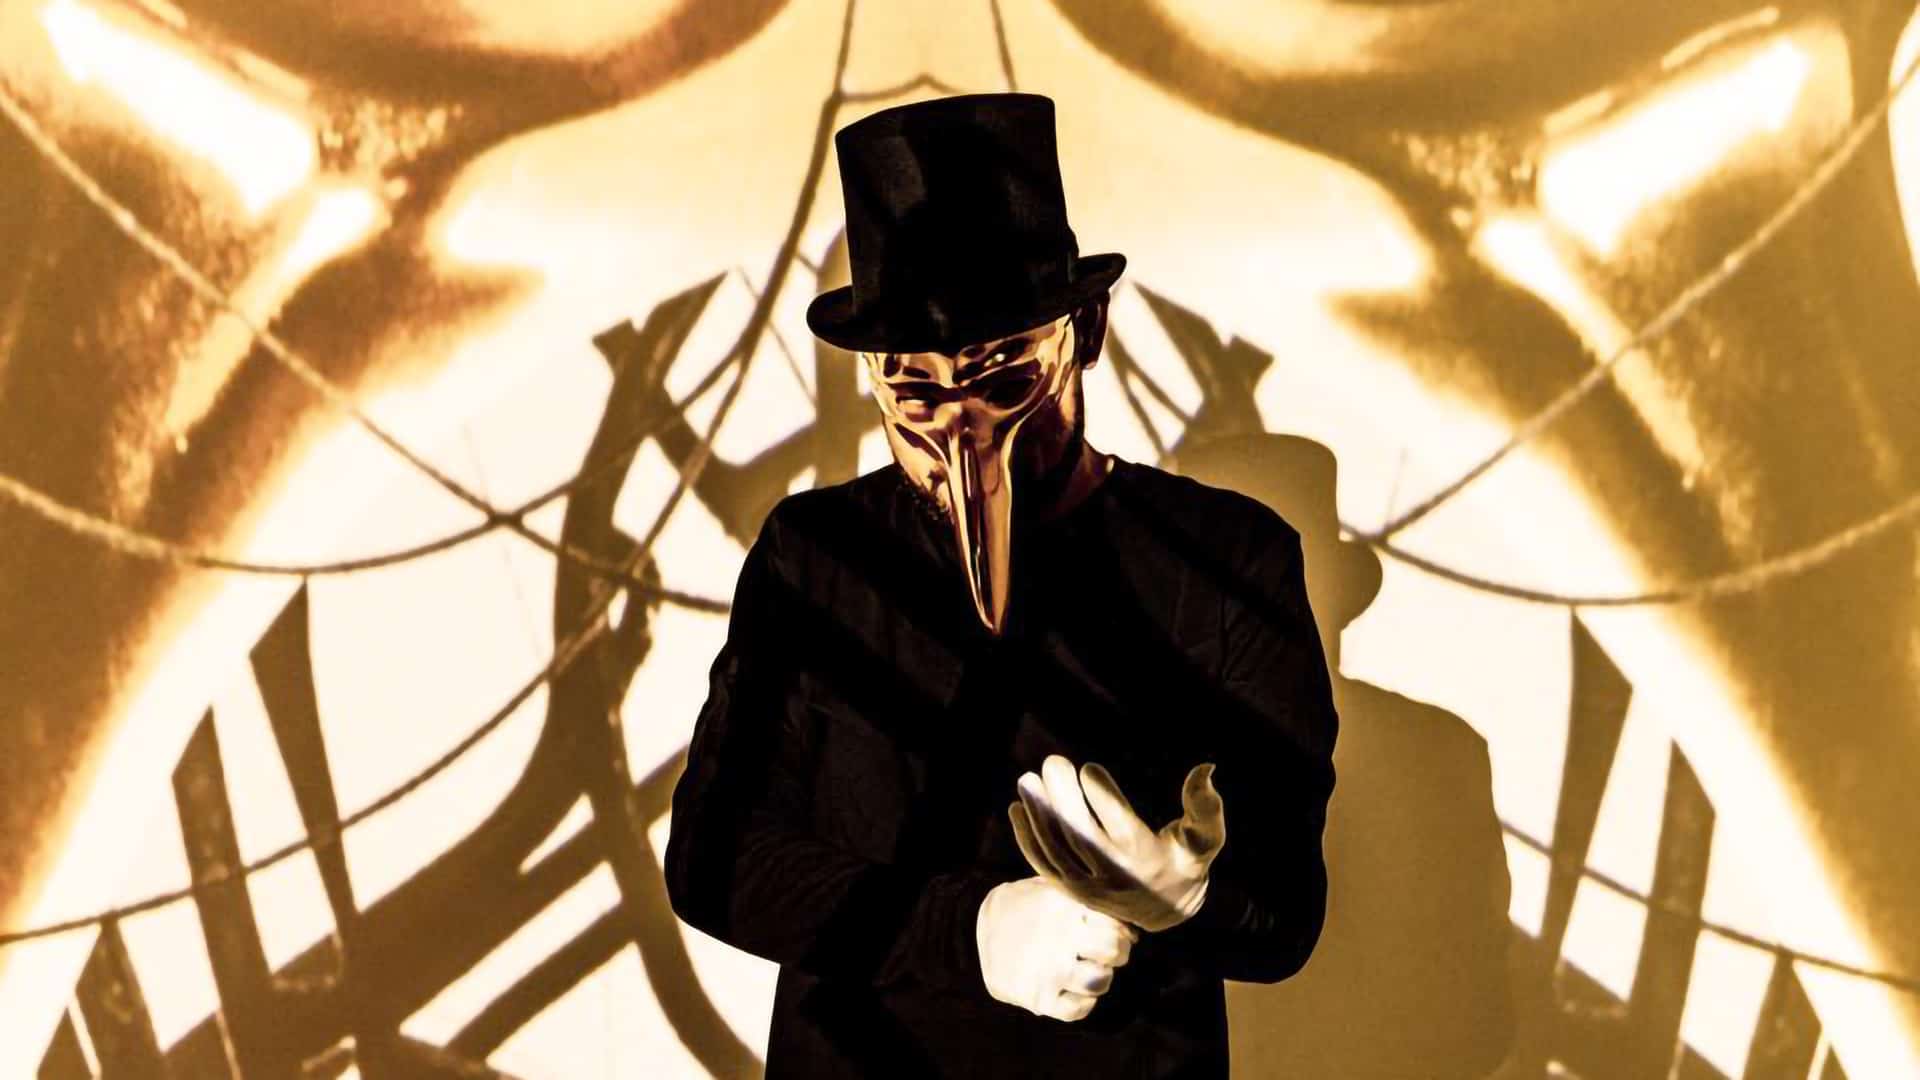 Claptone and APRE join forces to drop indulgently fun cut ‘My Night’: Listen